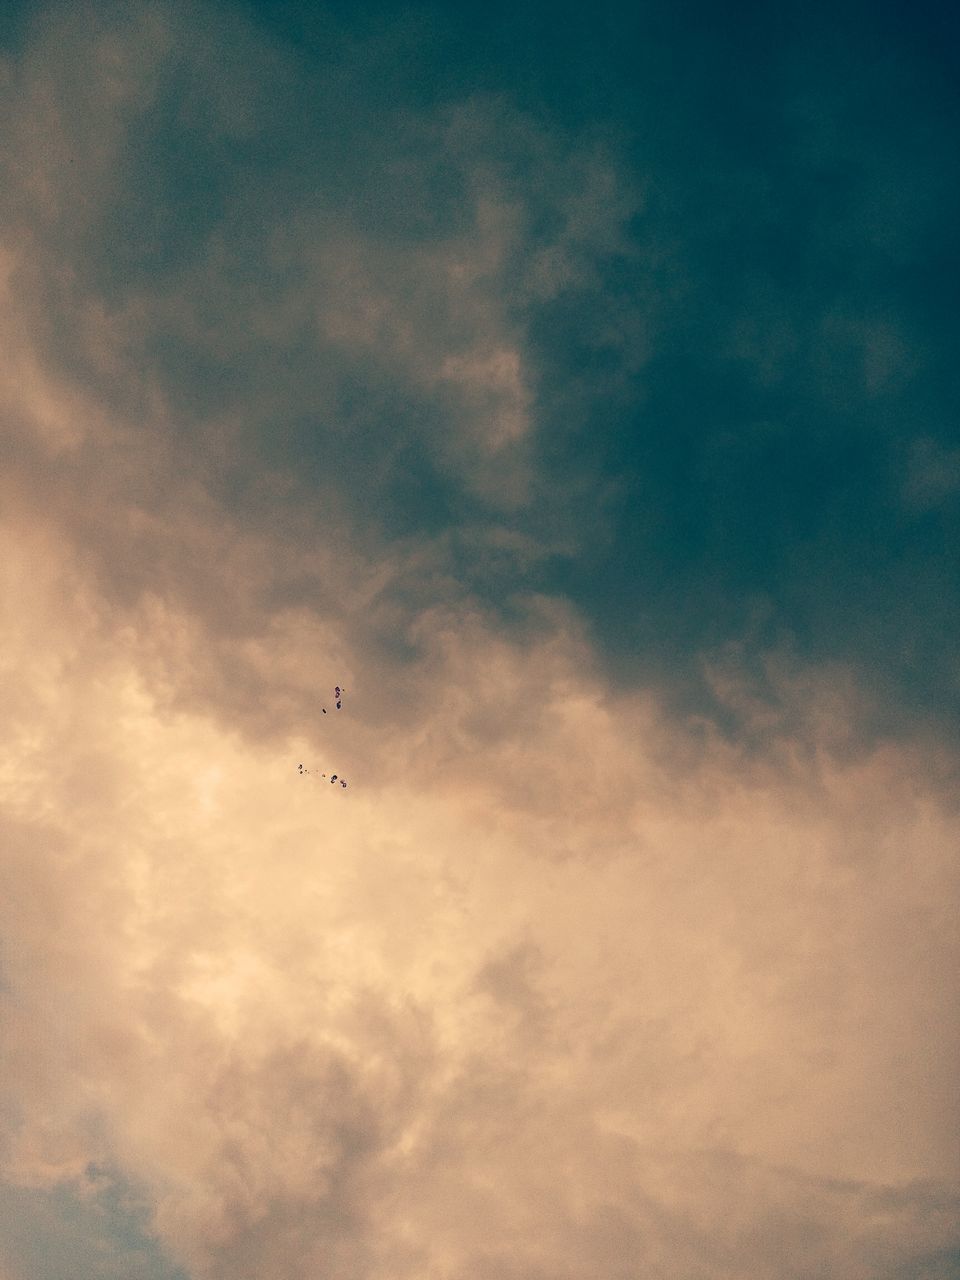 flying, cloud - sky, sky, bird, mid-air, low angle view, animal themes, animals in the wild, beauty in nature, nature, sunset, outdoors, scenics, no people, silhouette, one animal, sky only, animal wildlife, spread wings, day